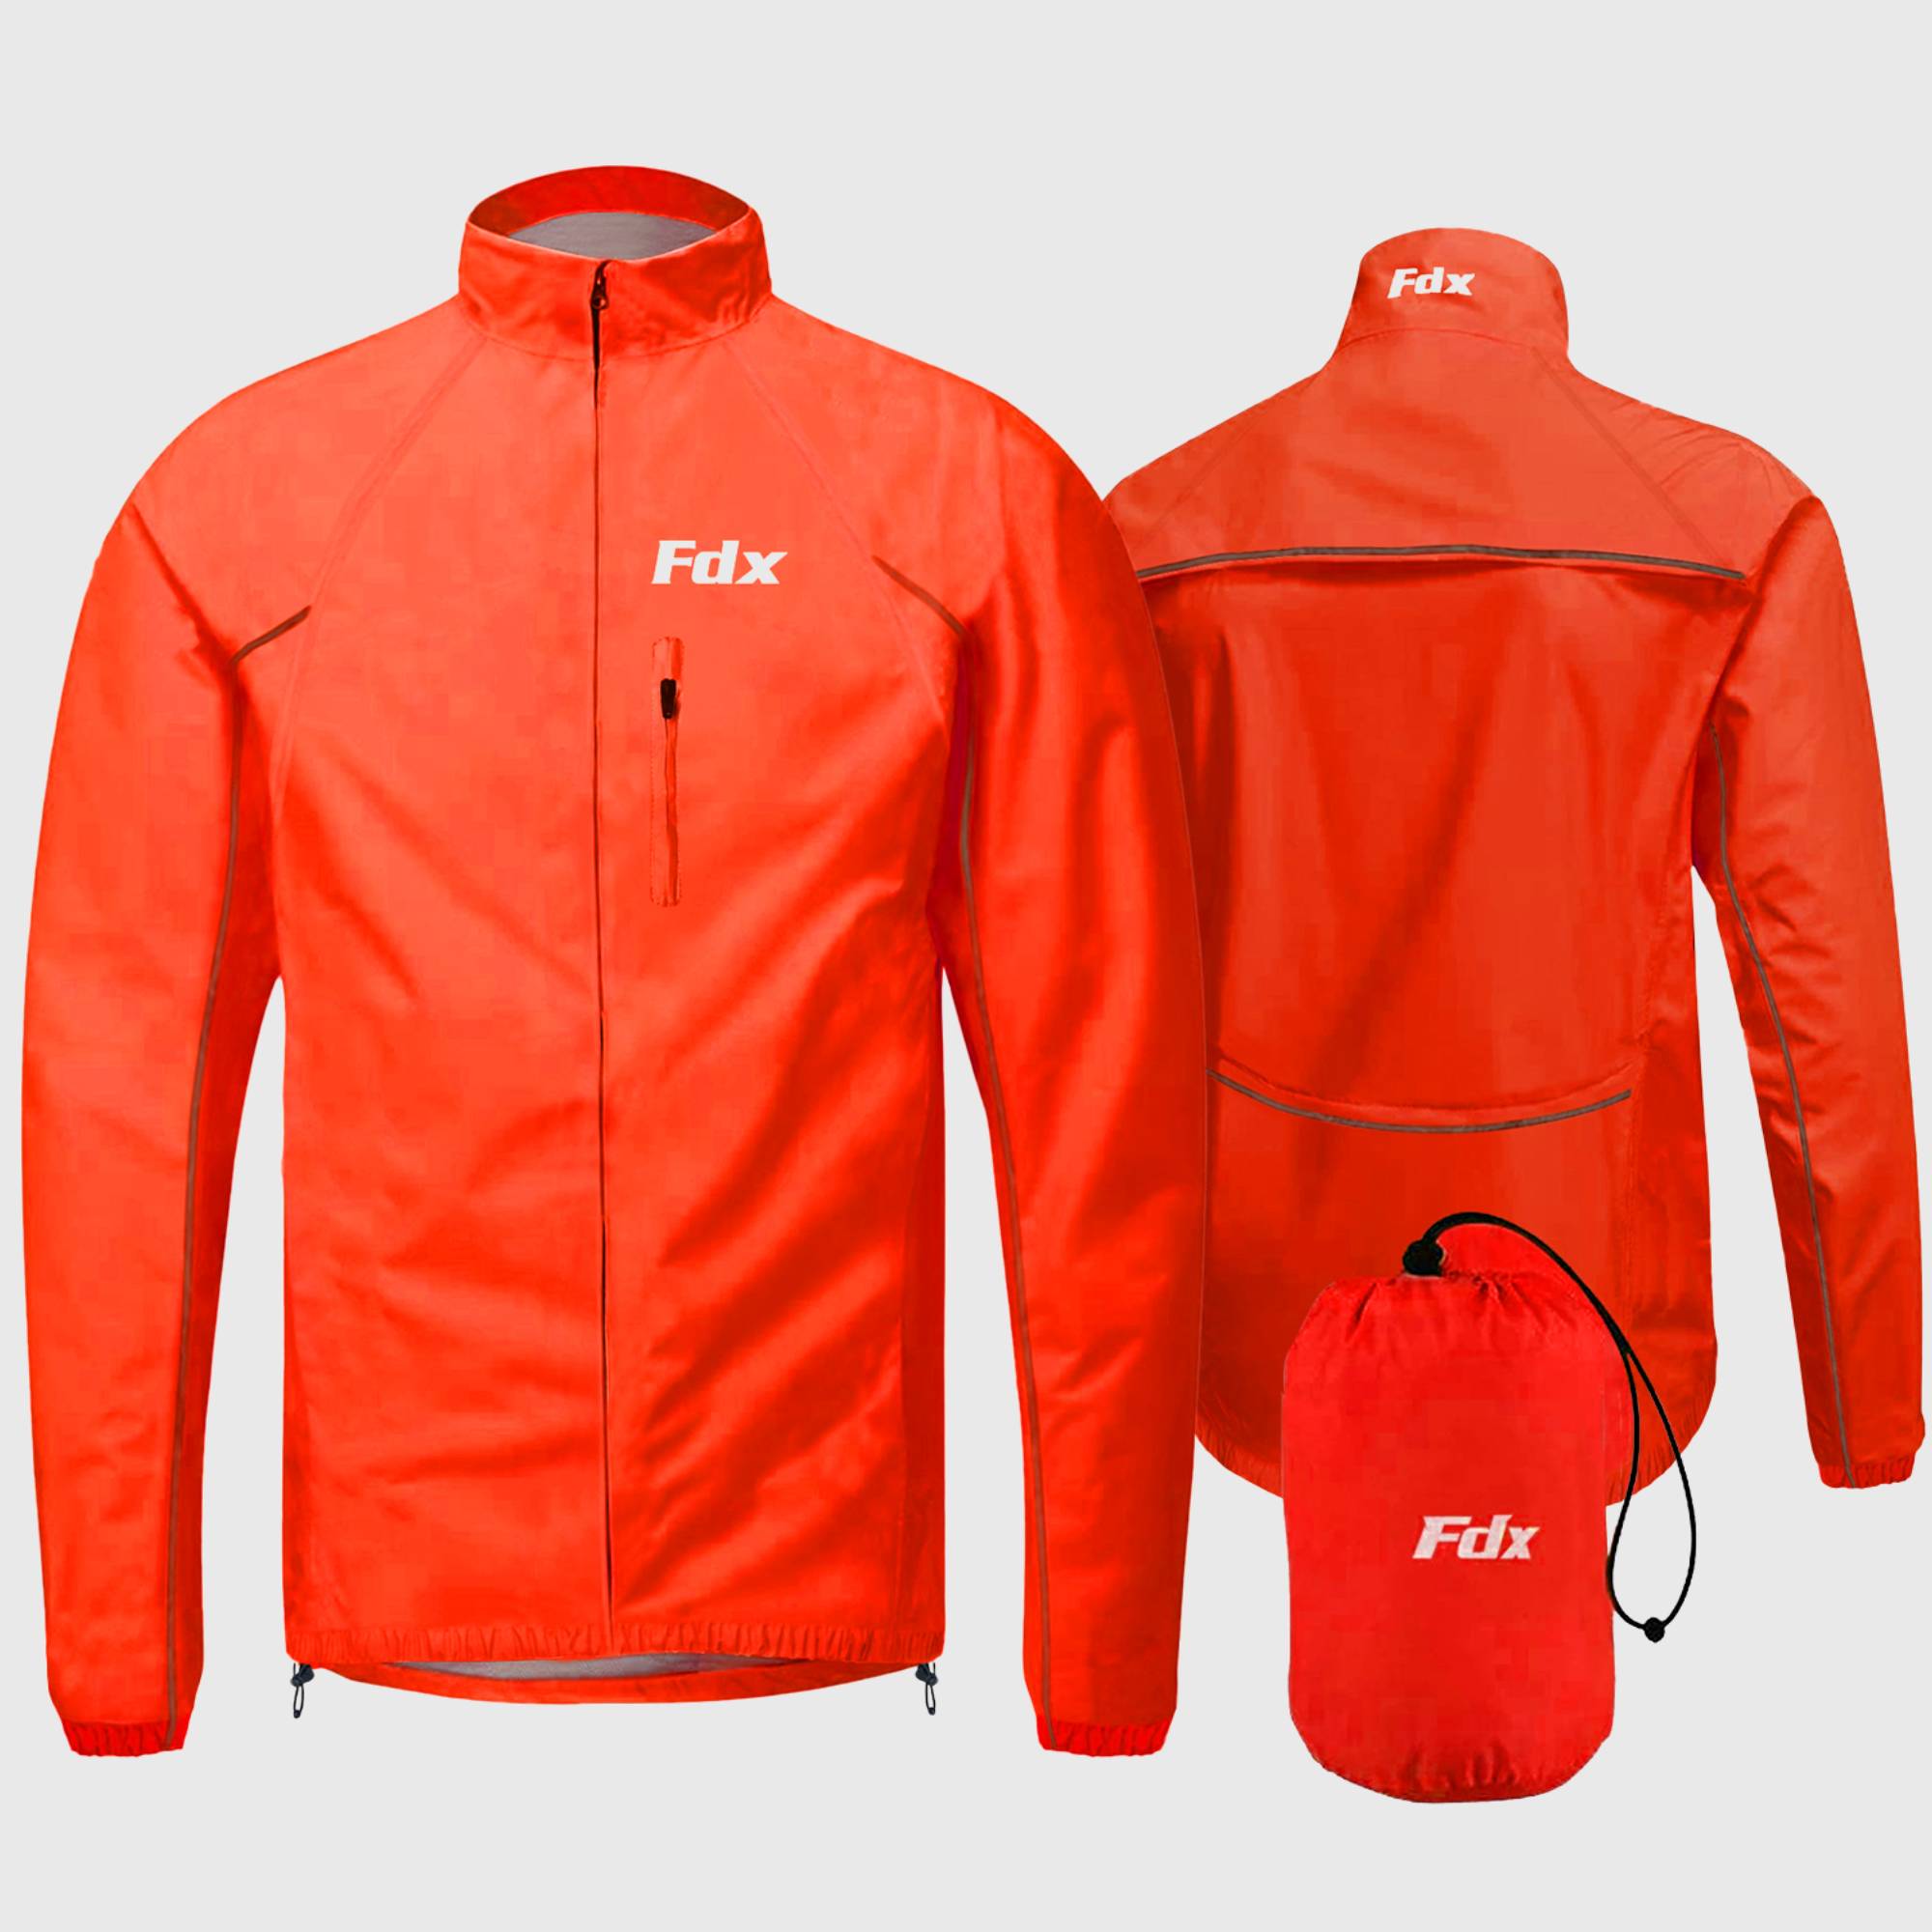 Fdx Men's Red Cycling Jacket for Winter Thermal Casual Softshell Clothing Lightweight, Shaverproof, Packable ,Windproof, Waterproof & Pockets - Defray